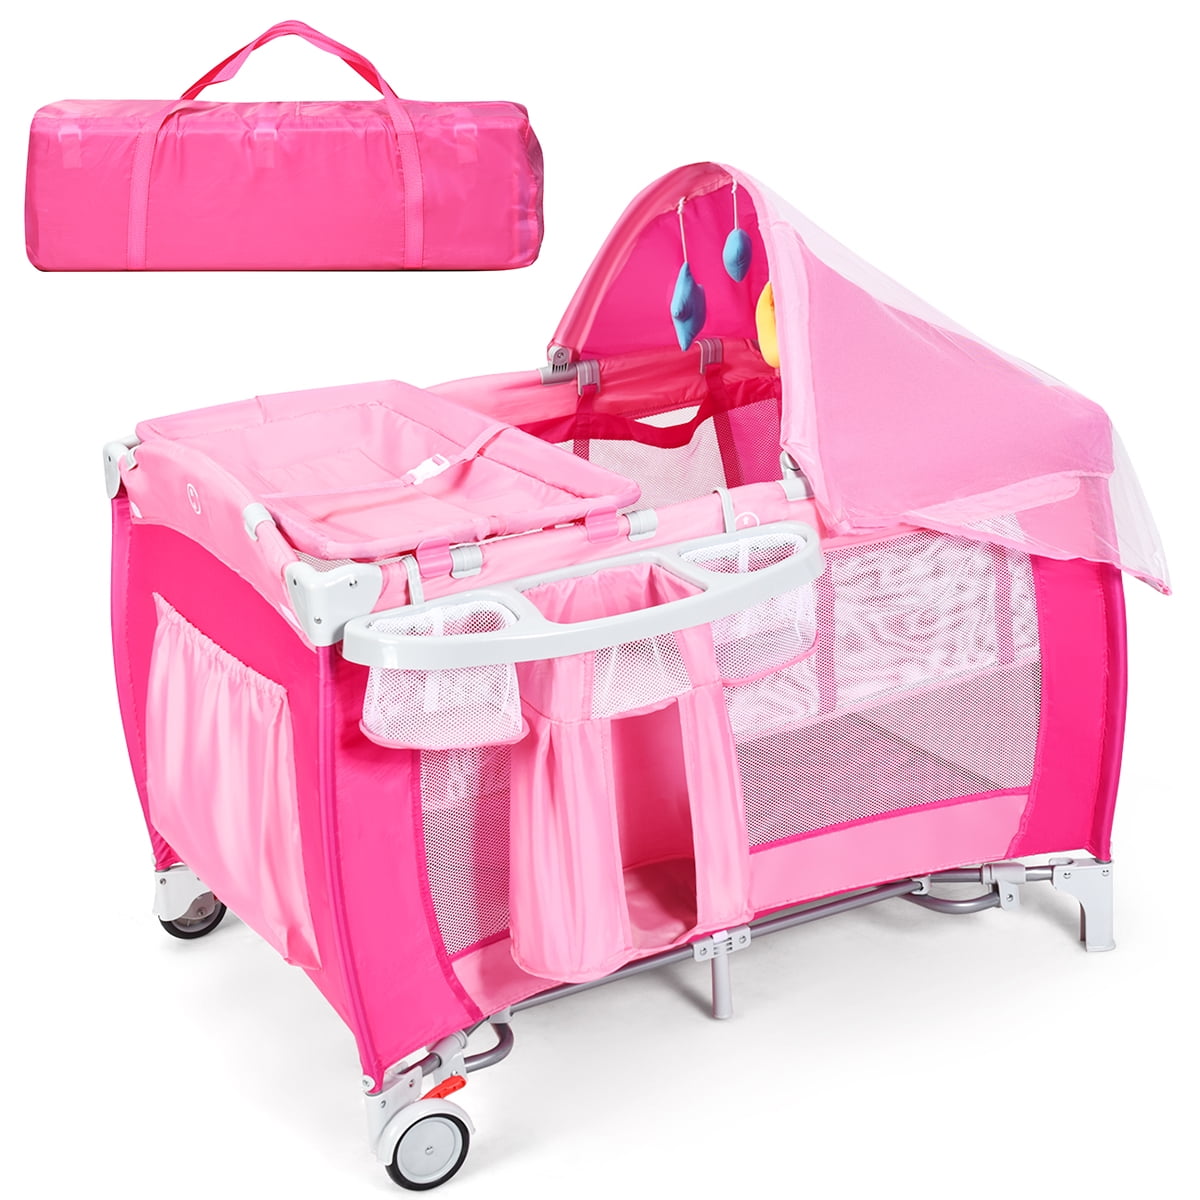 Wholesale Baby Cuna Corral Bebe Foldable Playpen Sleeping Babybed Cribs  Travel Cot Bassinet with Luxury Mosquito Net - China Baby Palypen, Baby  Playard